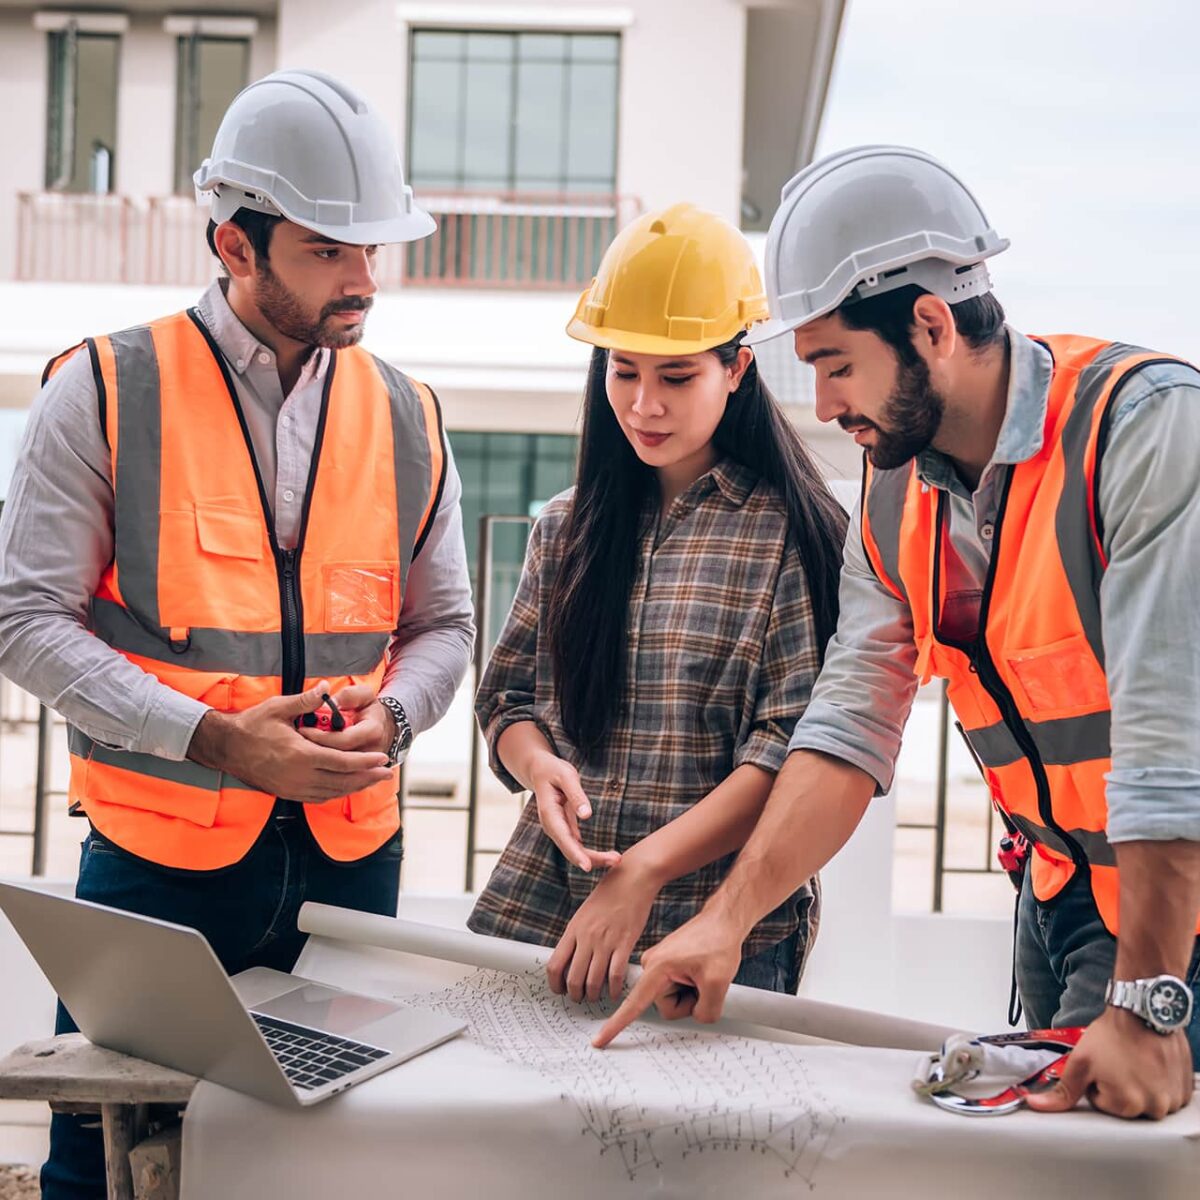 civil-engineer-construction-worker-architects-wearing-hardhats-safety-vests-are-working-together-construction-site-building-home-cooperation-teamwork-concept